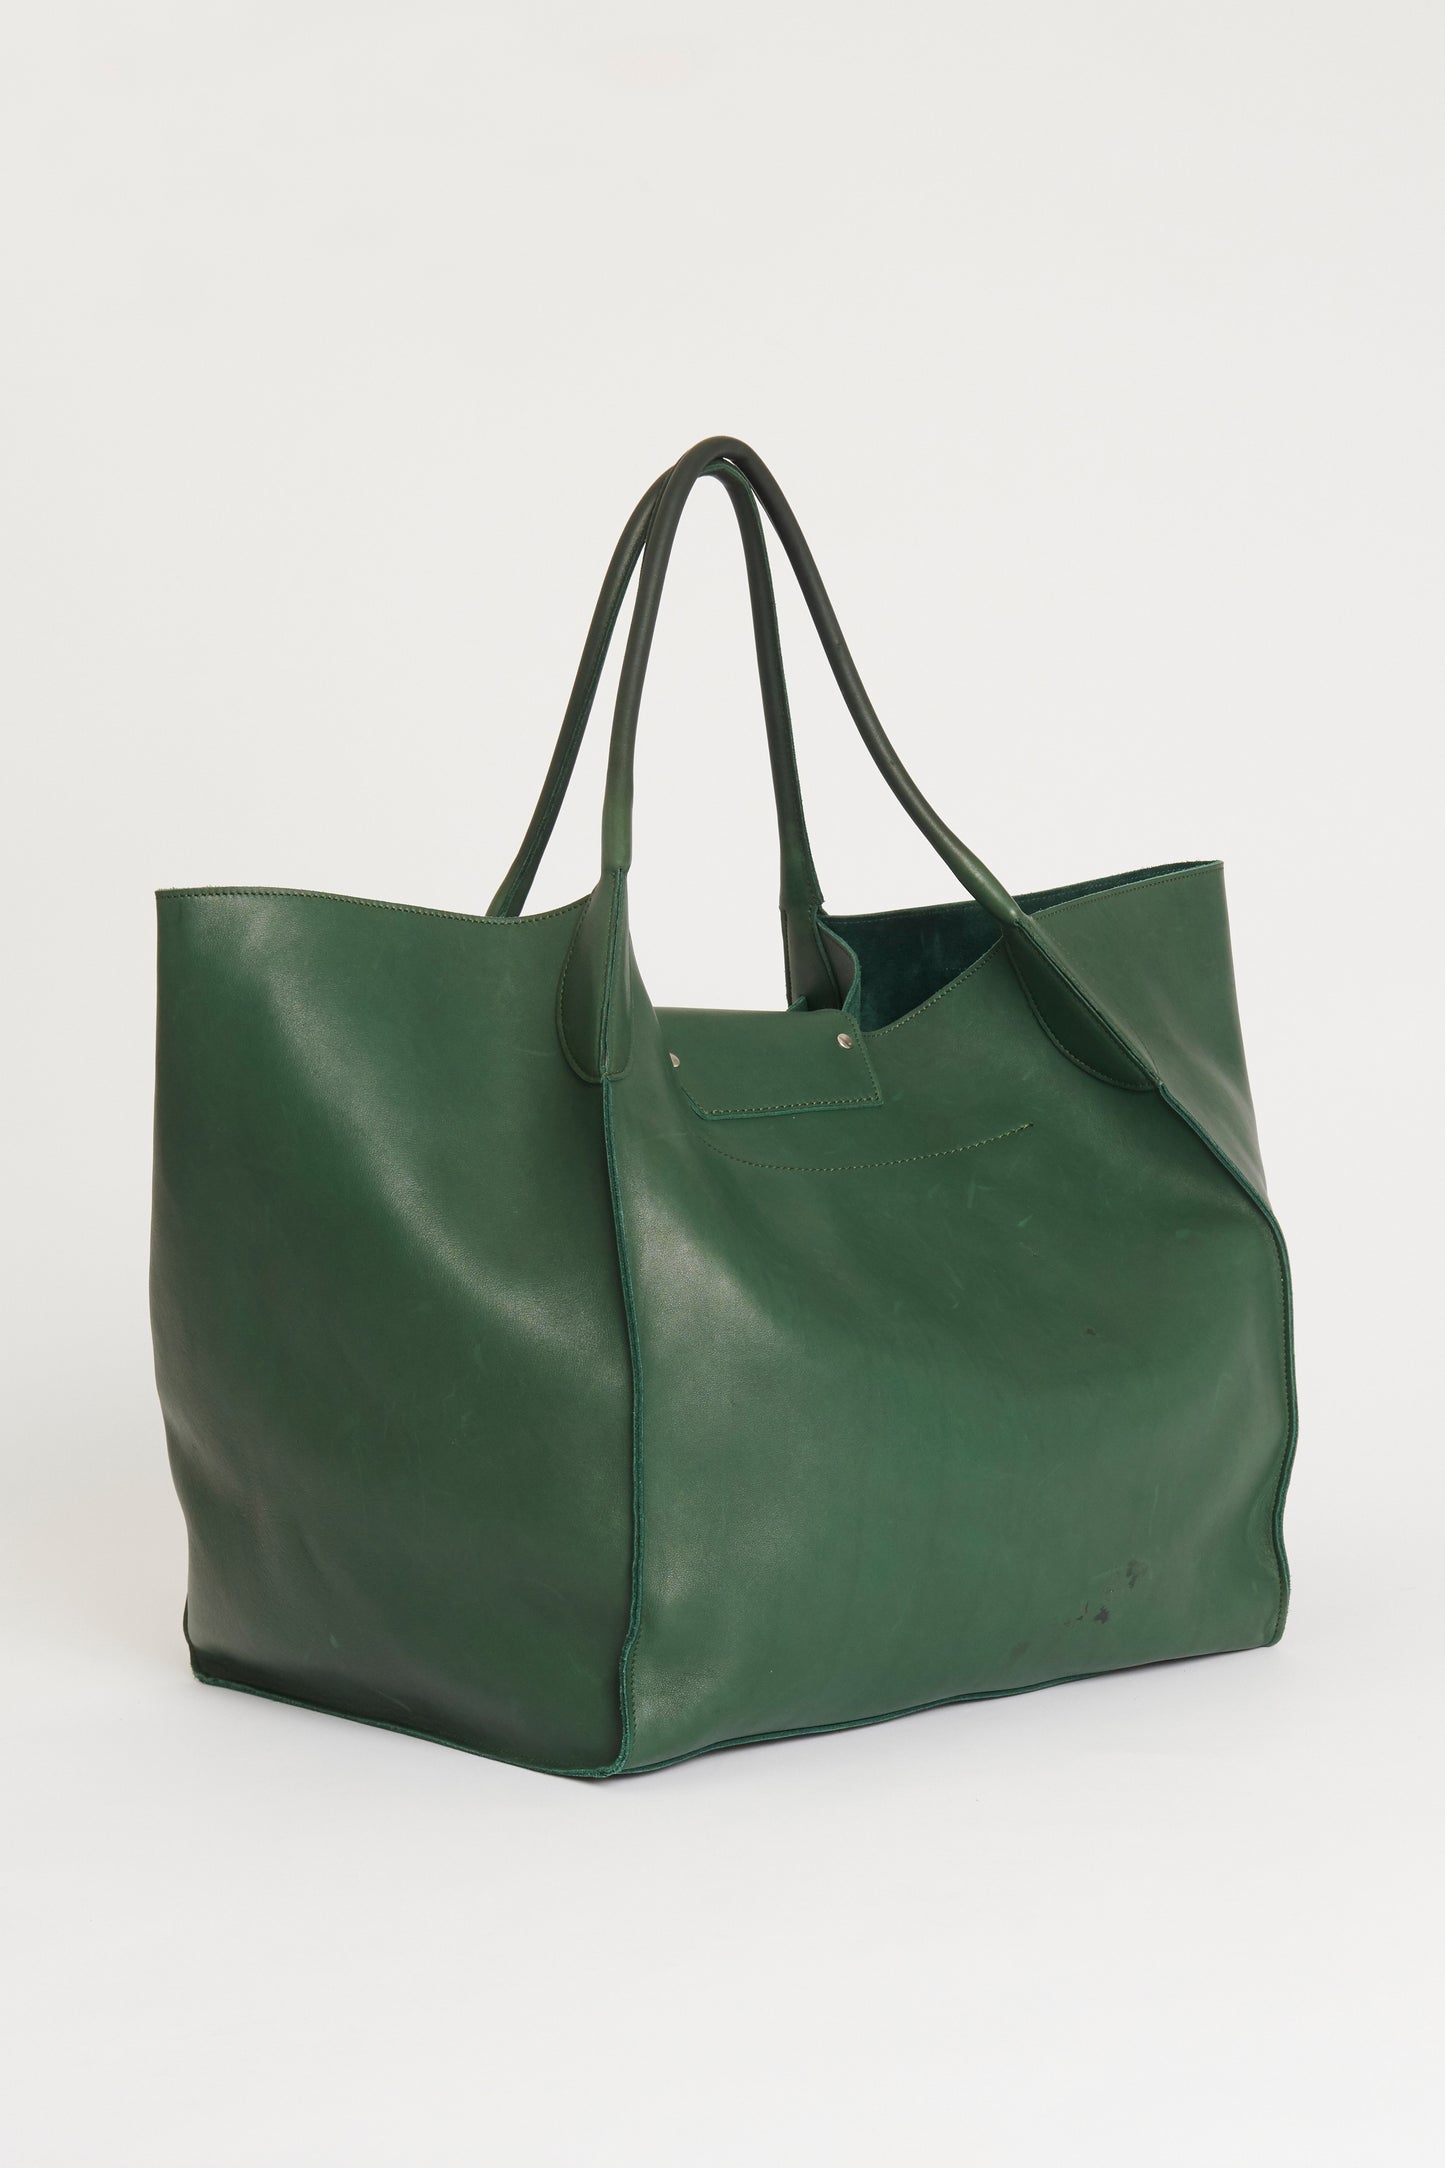 2018 Green Leather Large Preowned Big Bag